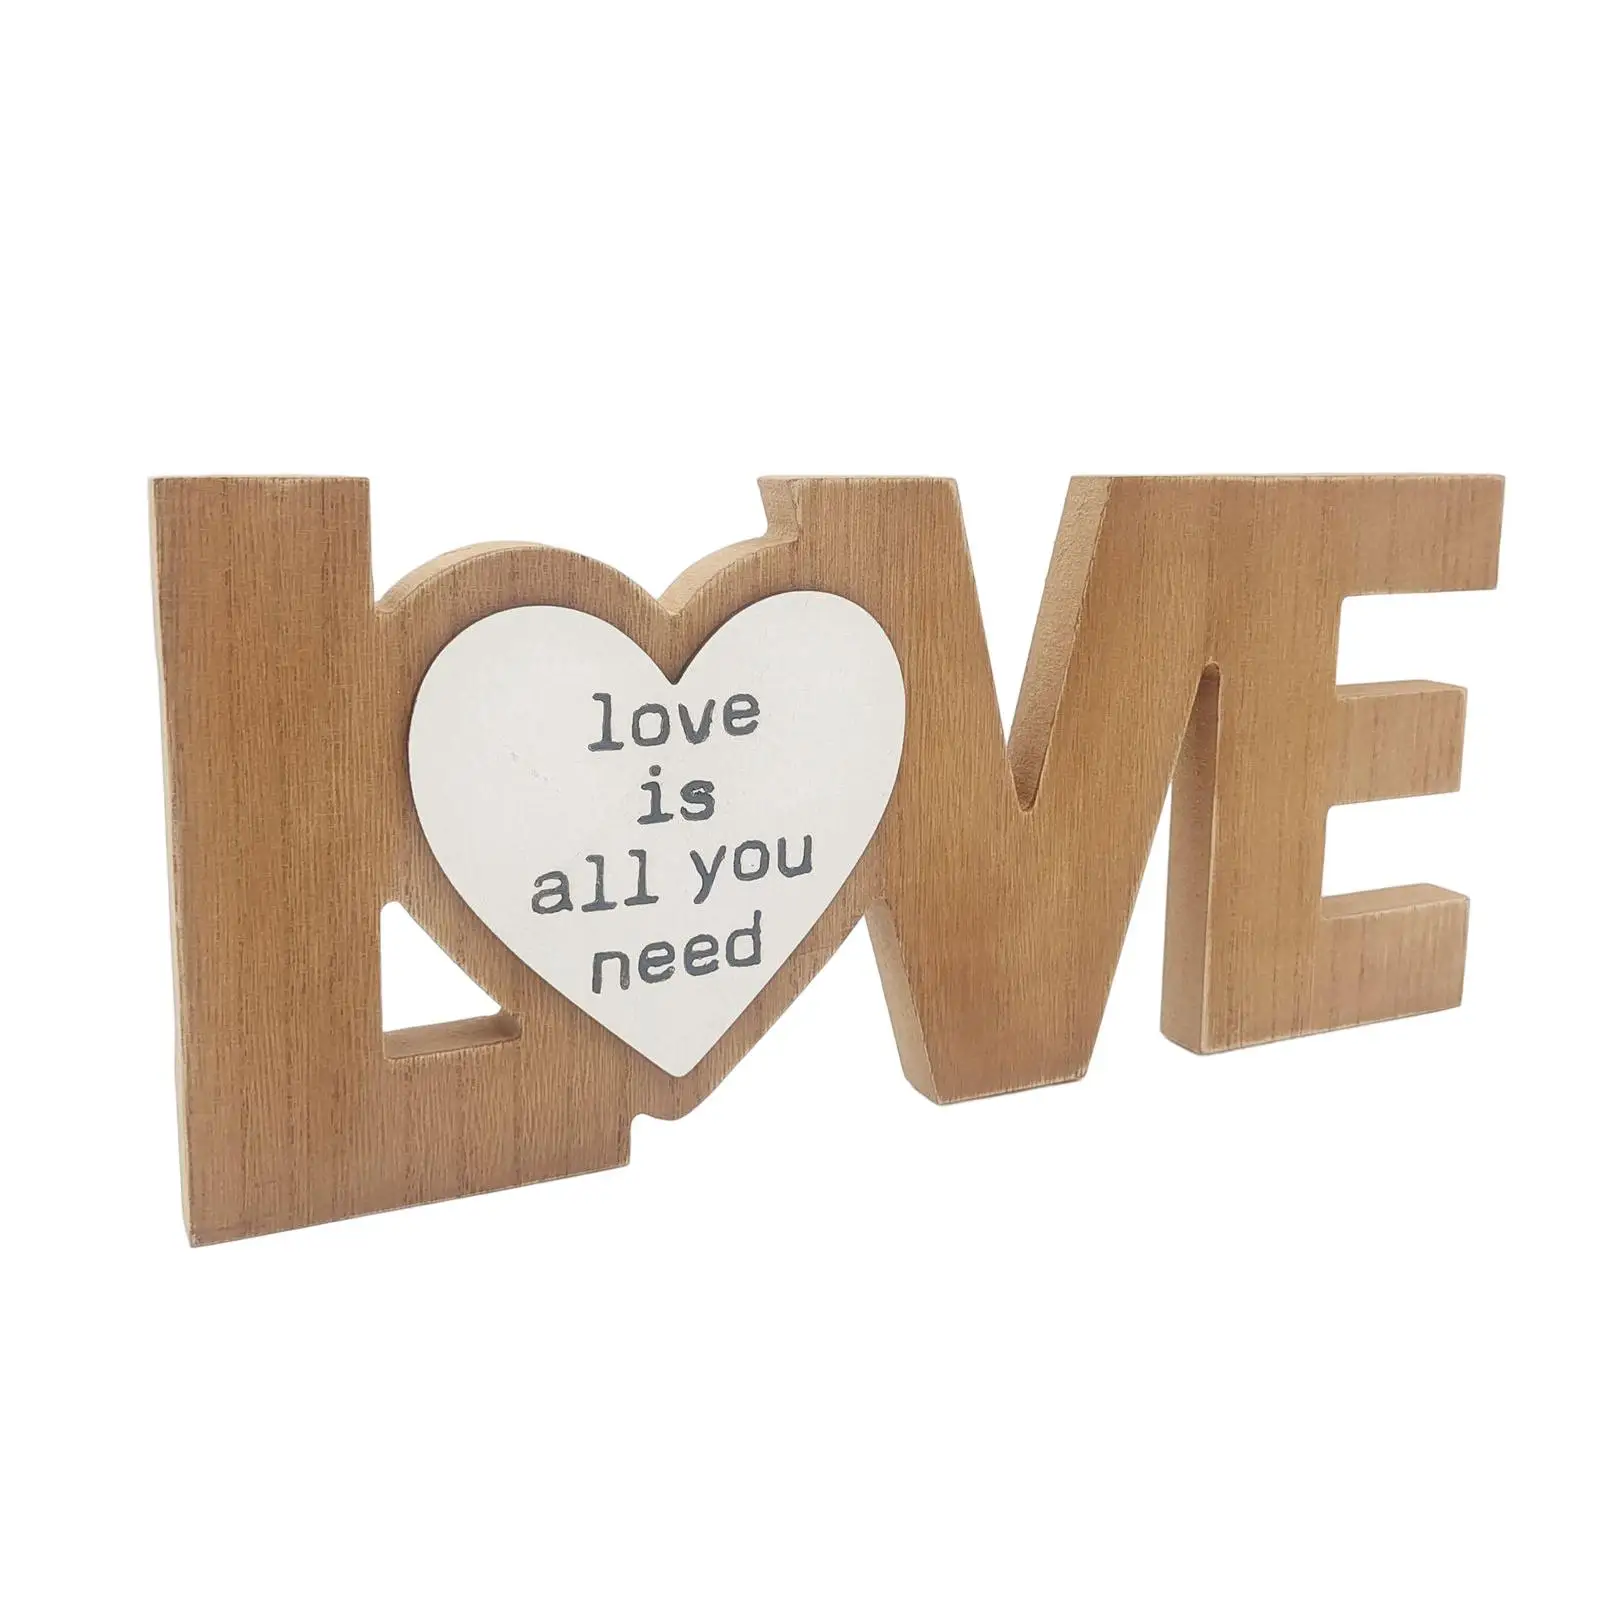 Rustic Wooden Love Words Decorative Sign Free Standing for Valentine`S Day Durable Measure 11.8x5.5x0.8inch Accessory Home Decor